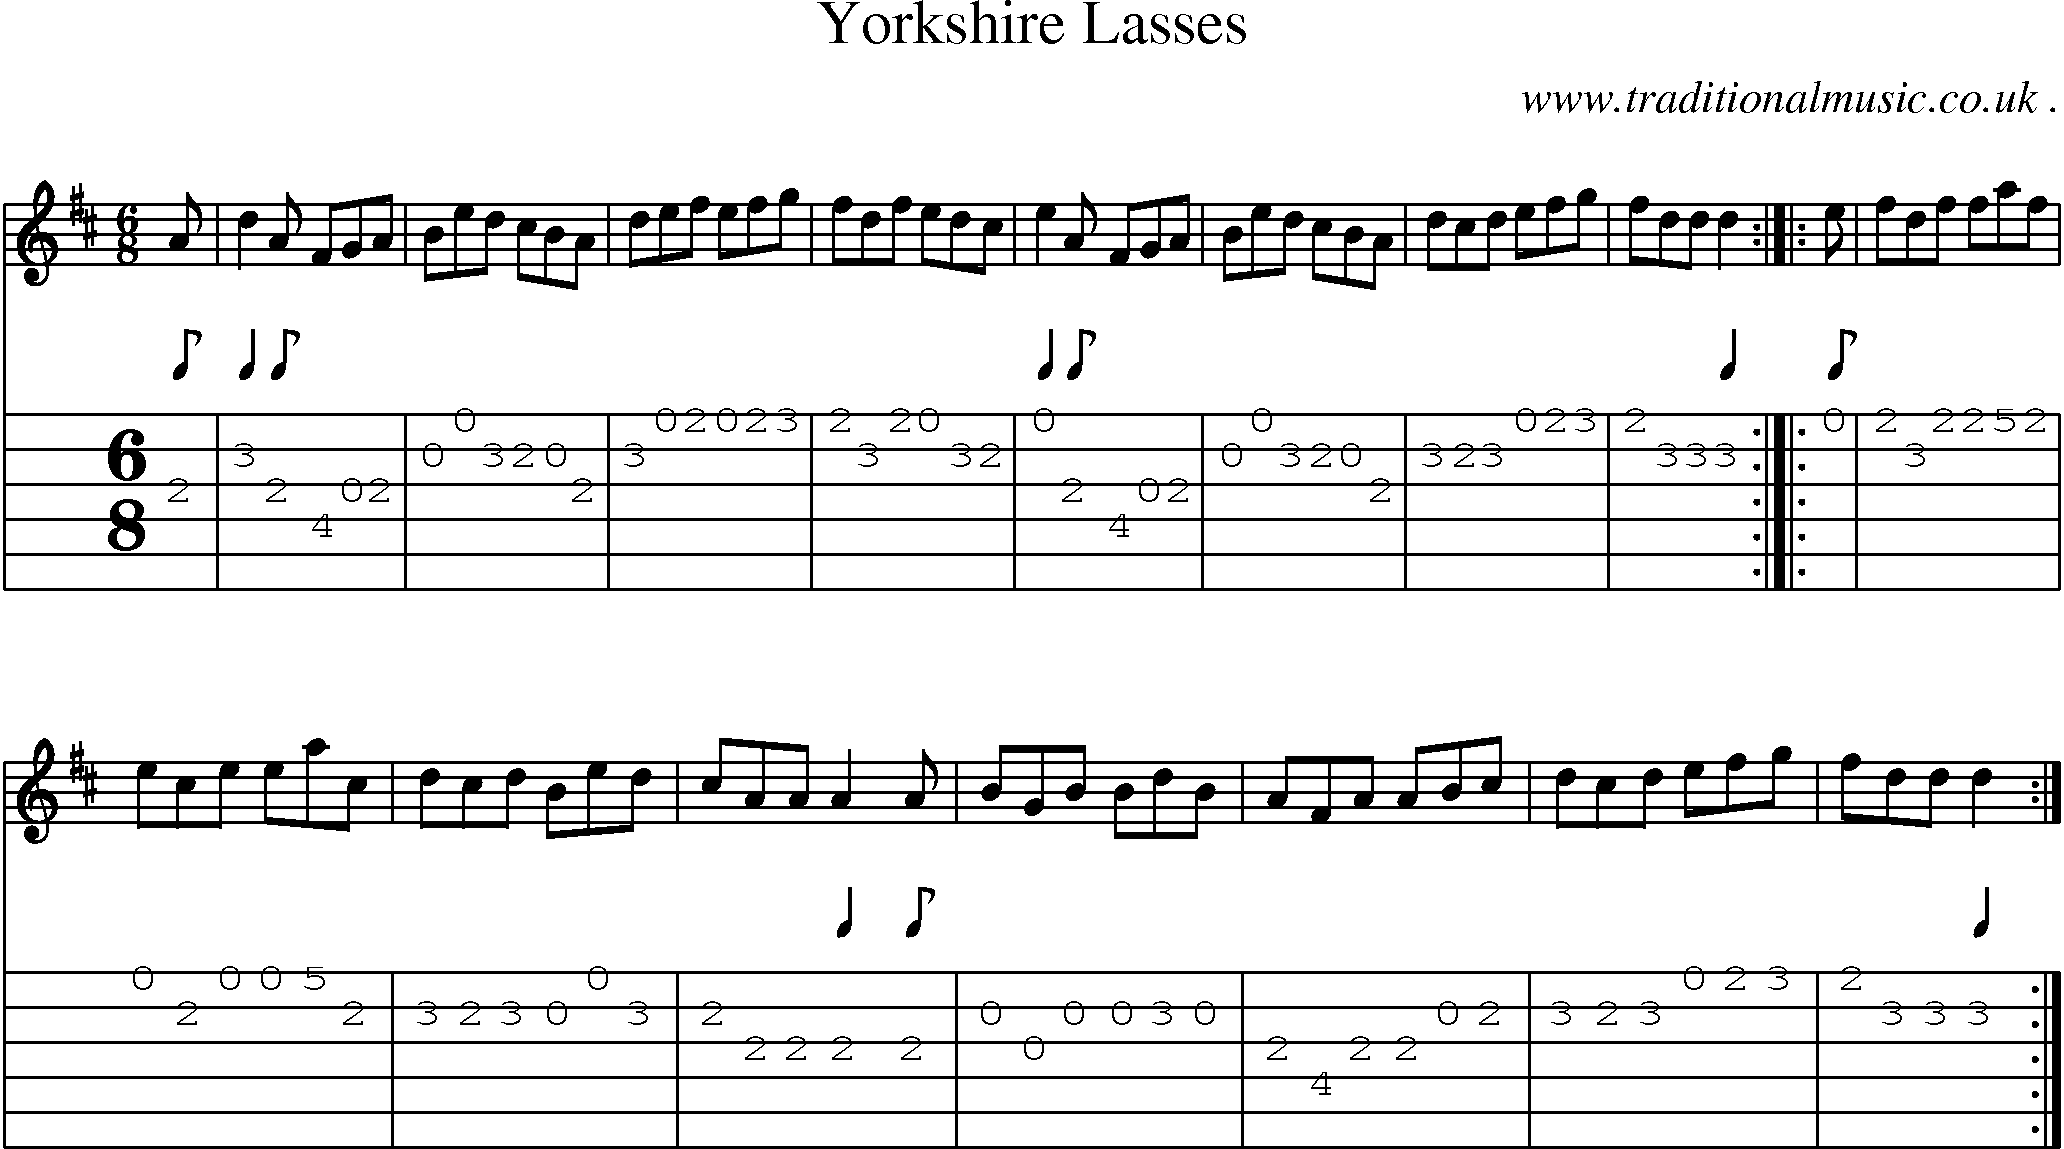 Sheet-Music and Guitar Tabs for Yorkshire Lasses